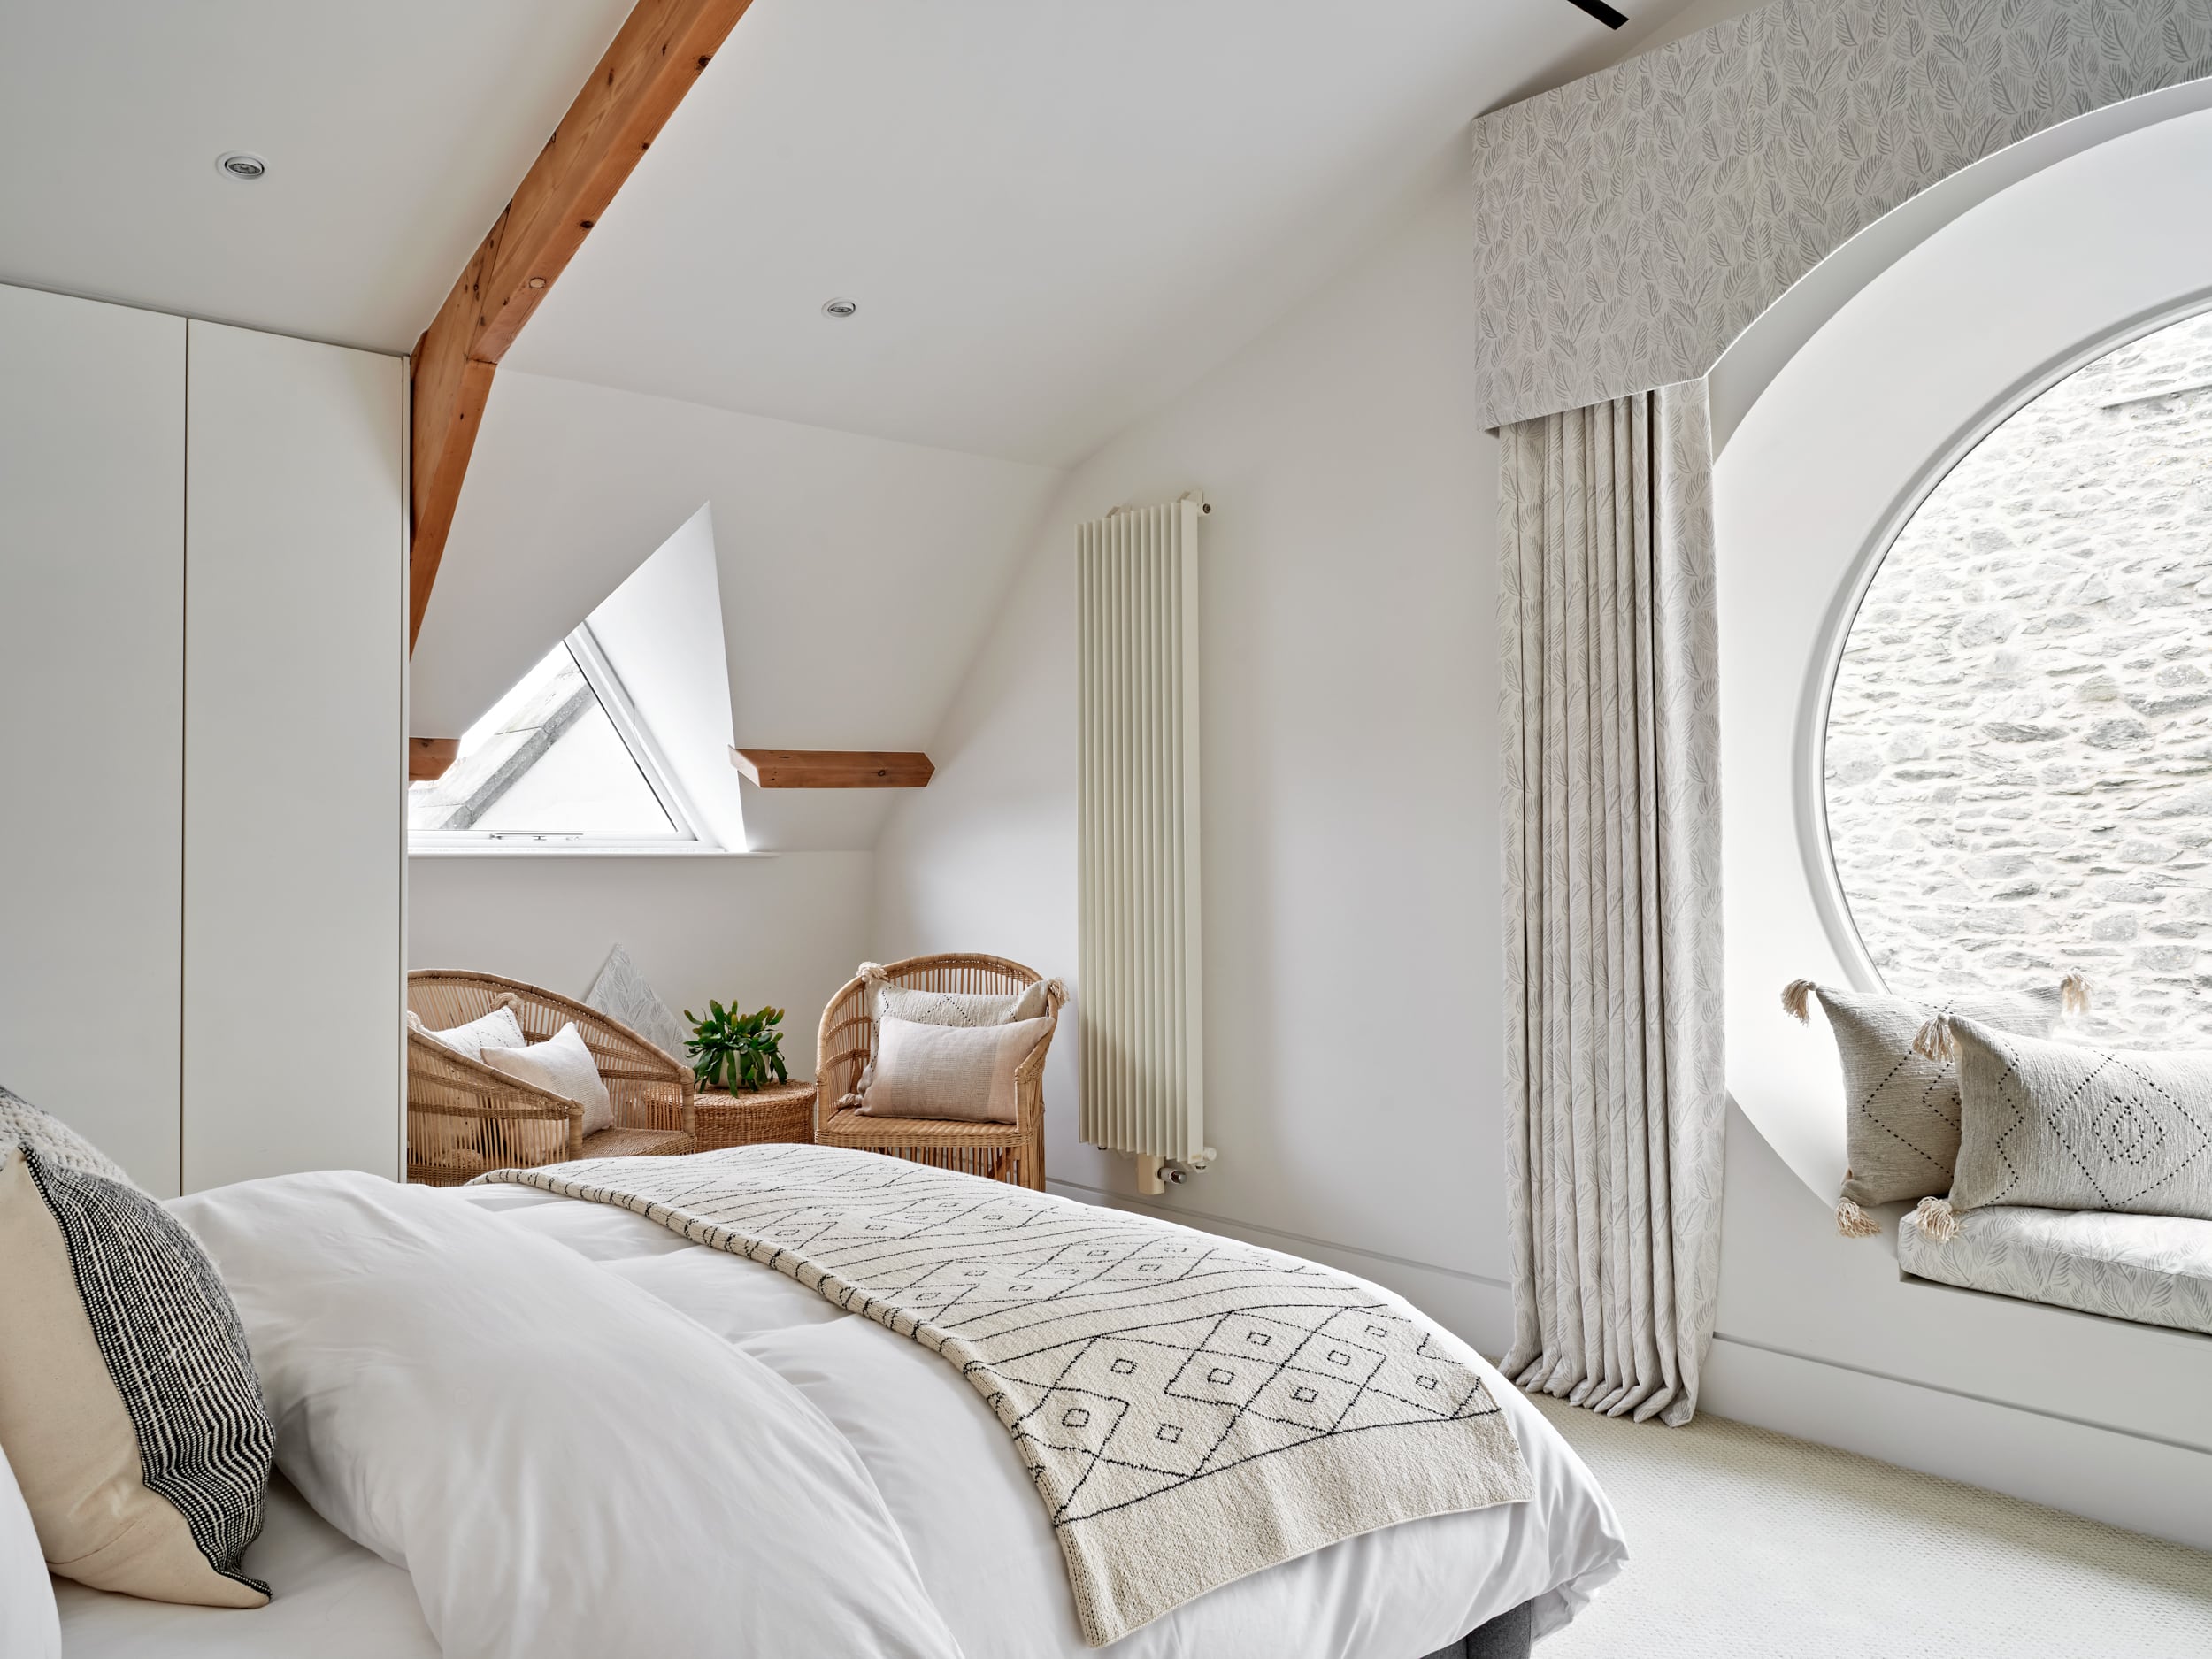 Light and neutral bedroom with reading nook by the window.